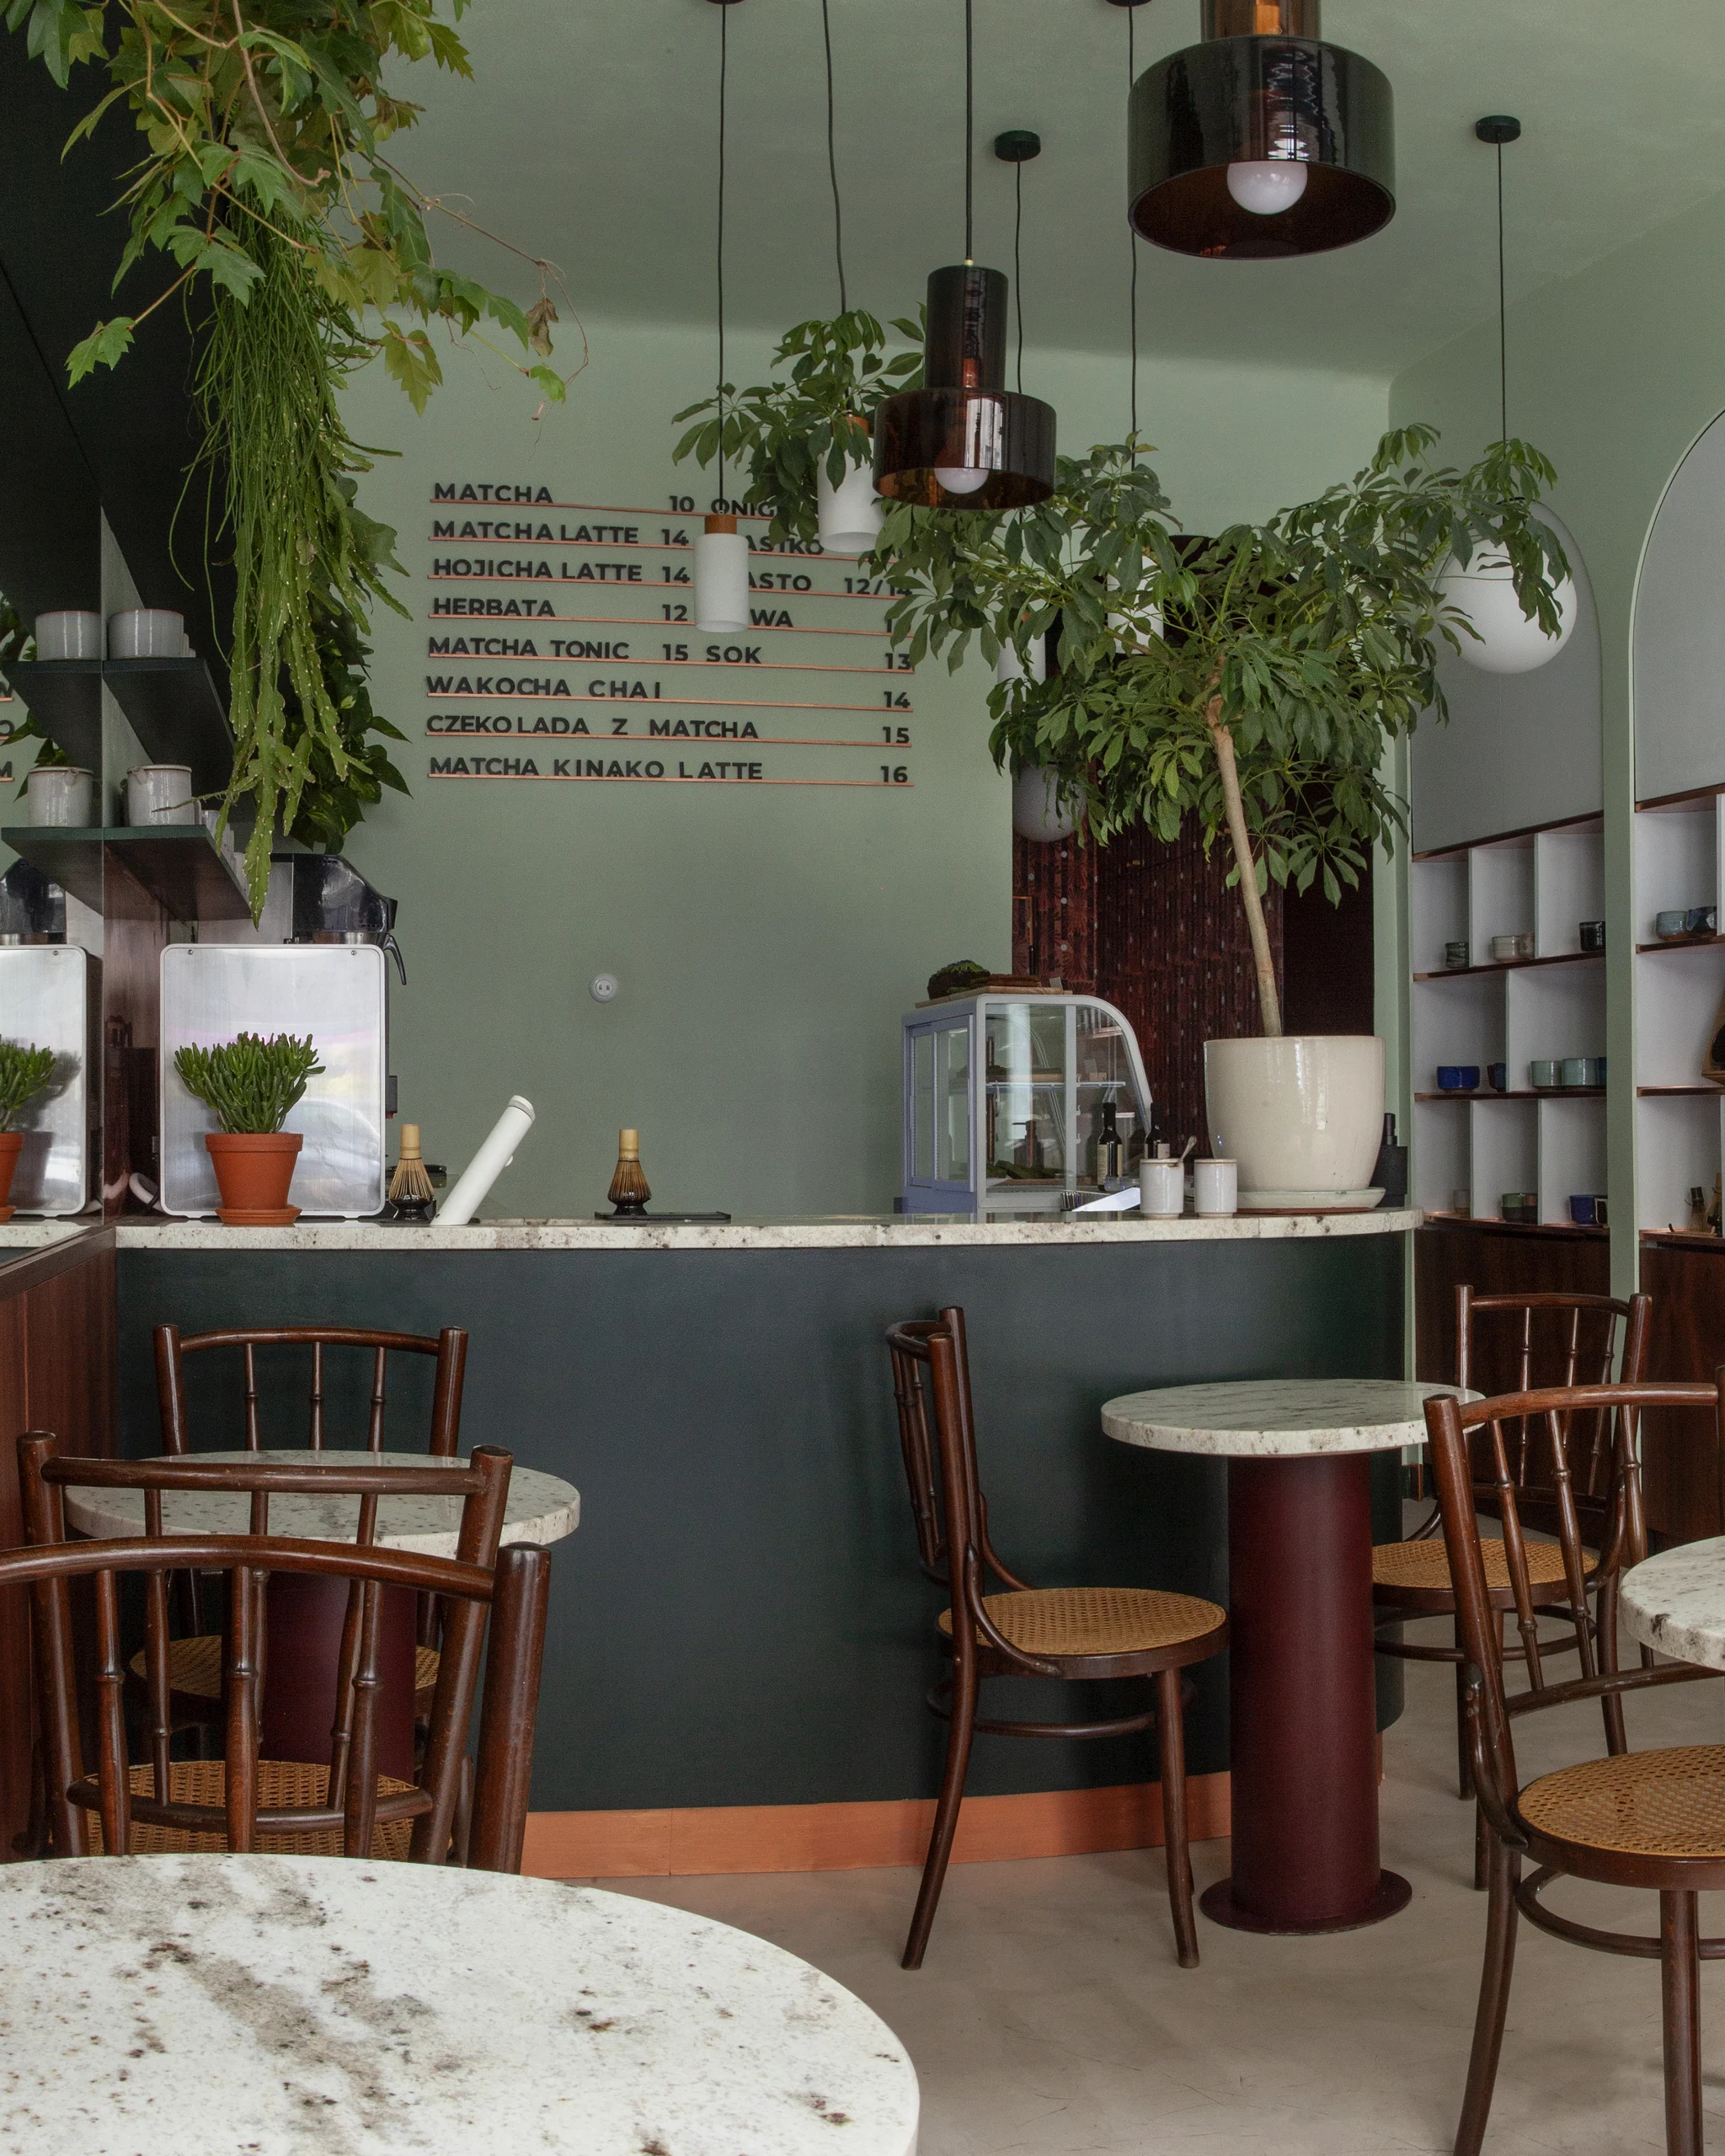 tearoom with green walls, marble tables, green walls and plants